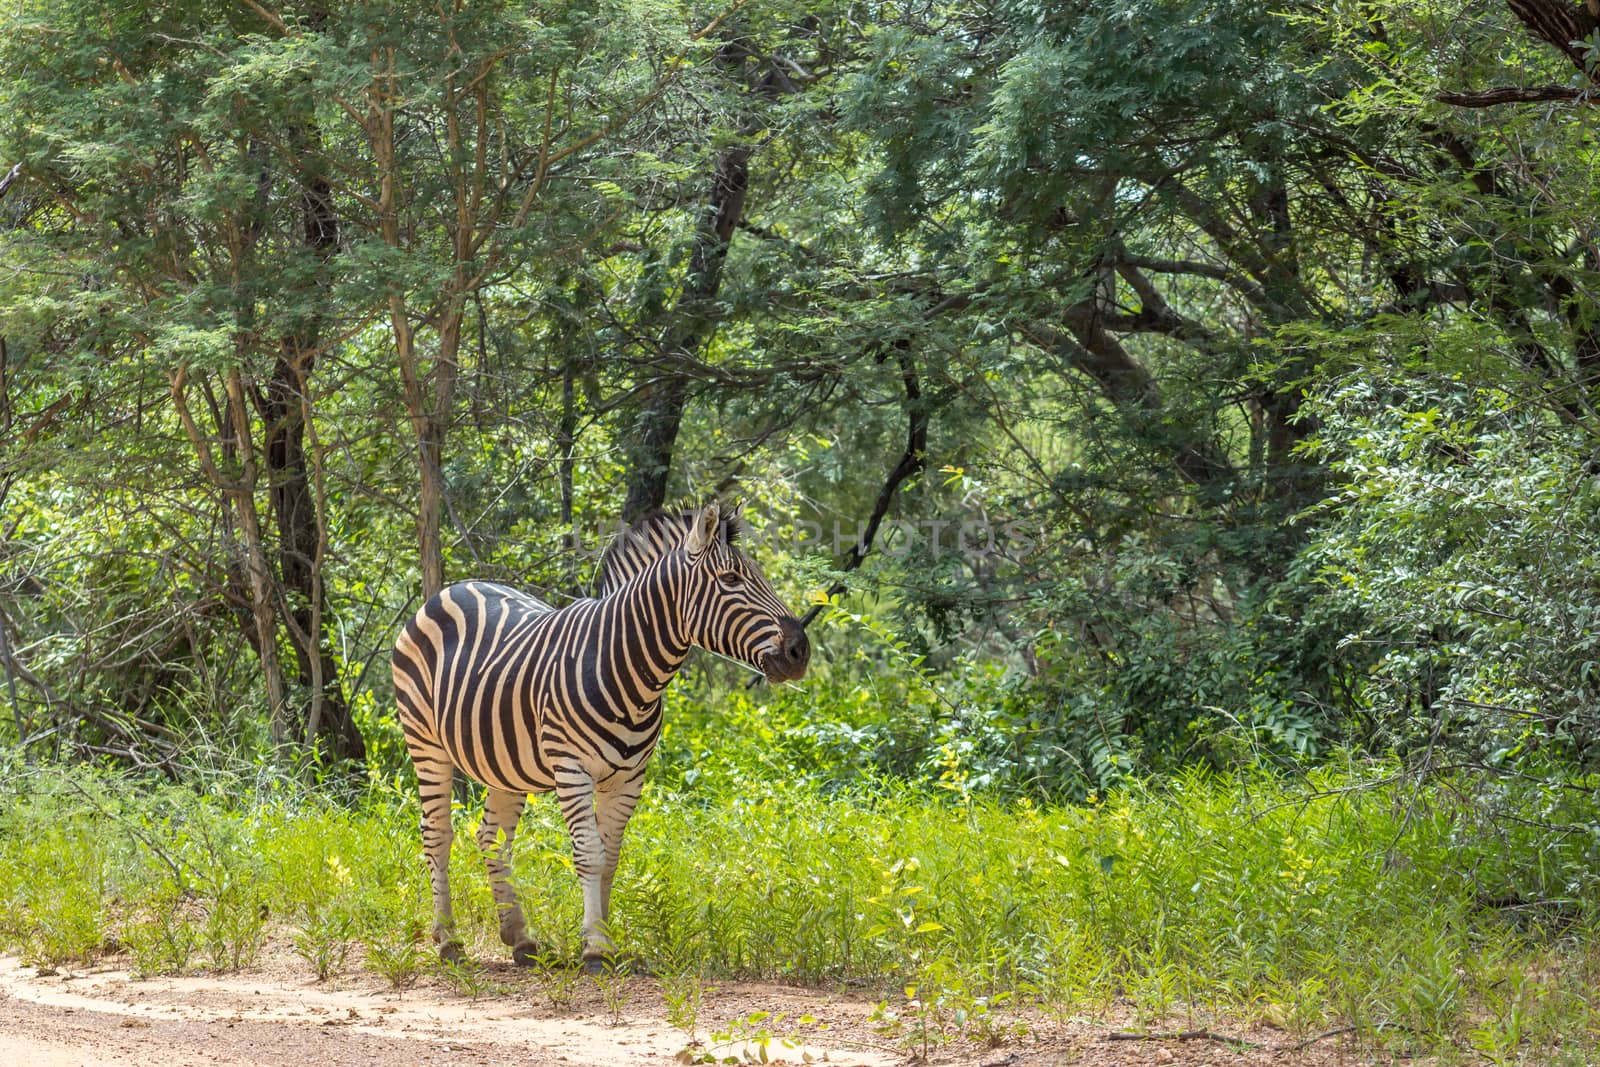 Burchells zebra standing on the side of a dirt road